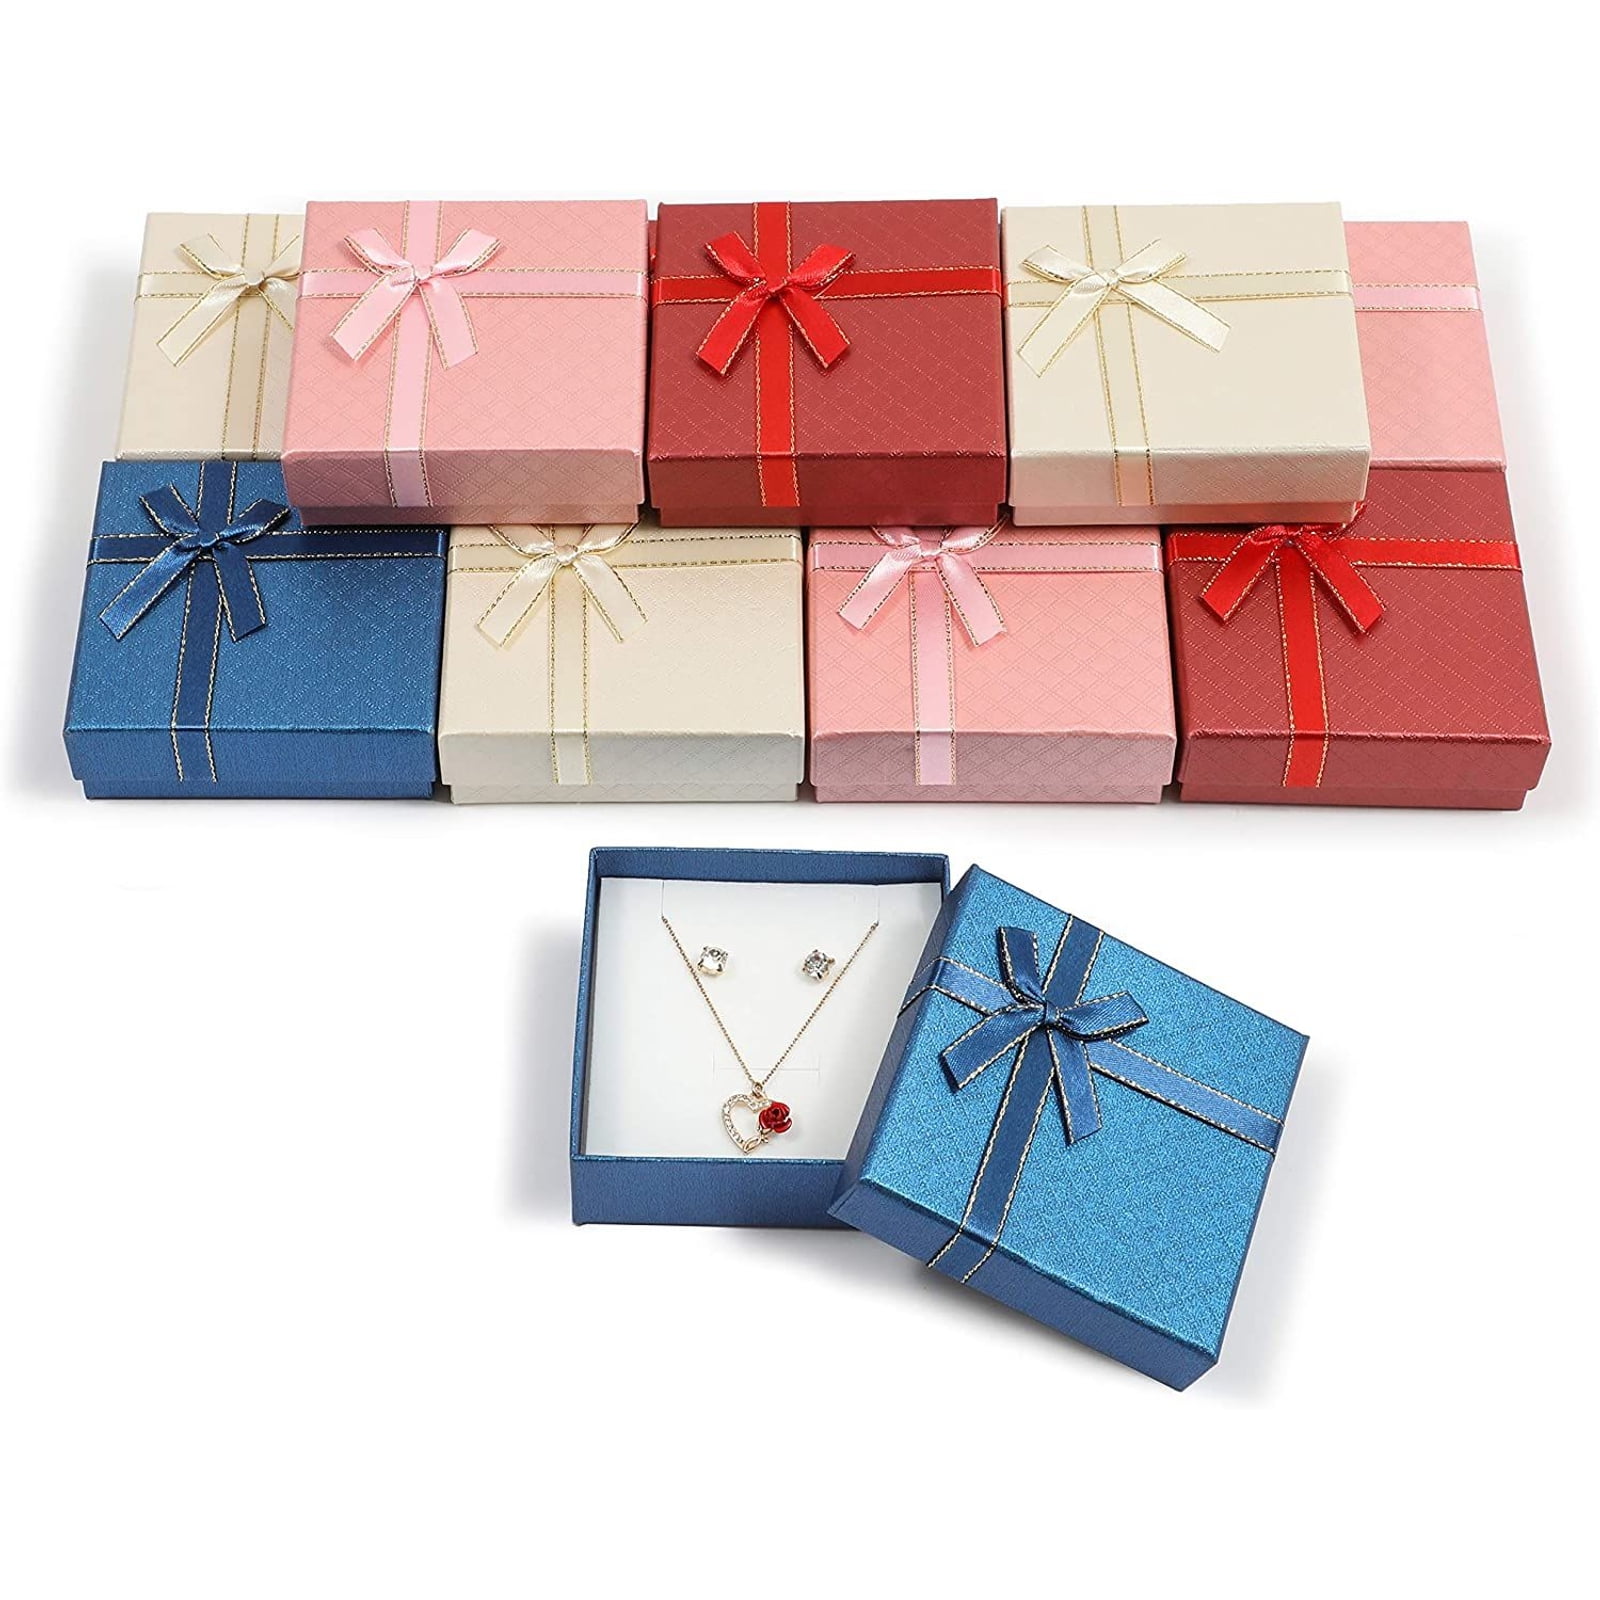 Wholesale 10 Boxes 9*9*2cm Red Square Jewelry Box For Bracelet Gfit Box Displays 